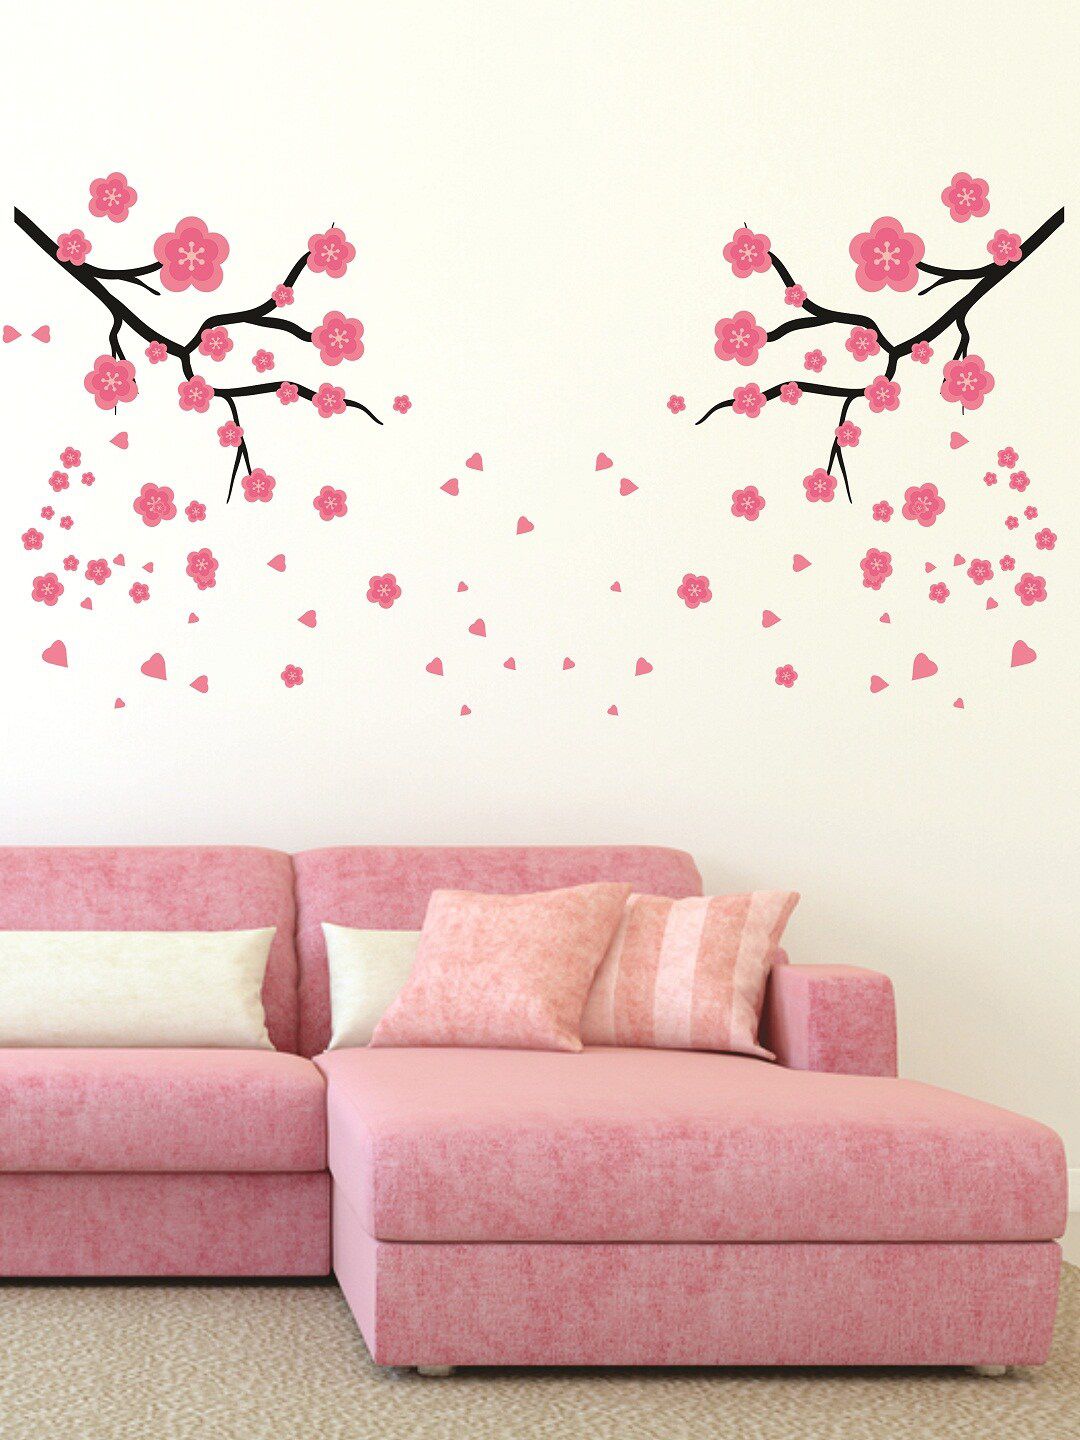 WALLSTICK Pink & Black Floral Large Vinyl Wall Sticker Price in India